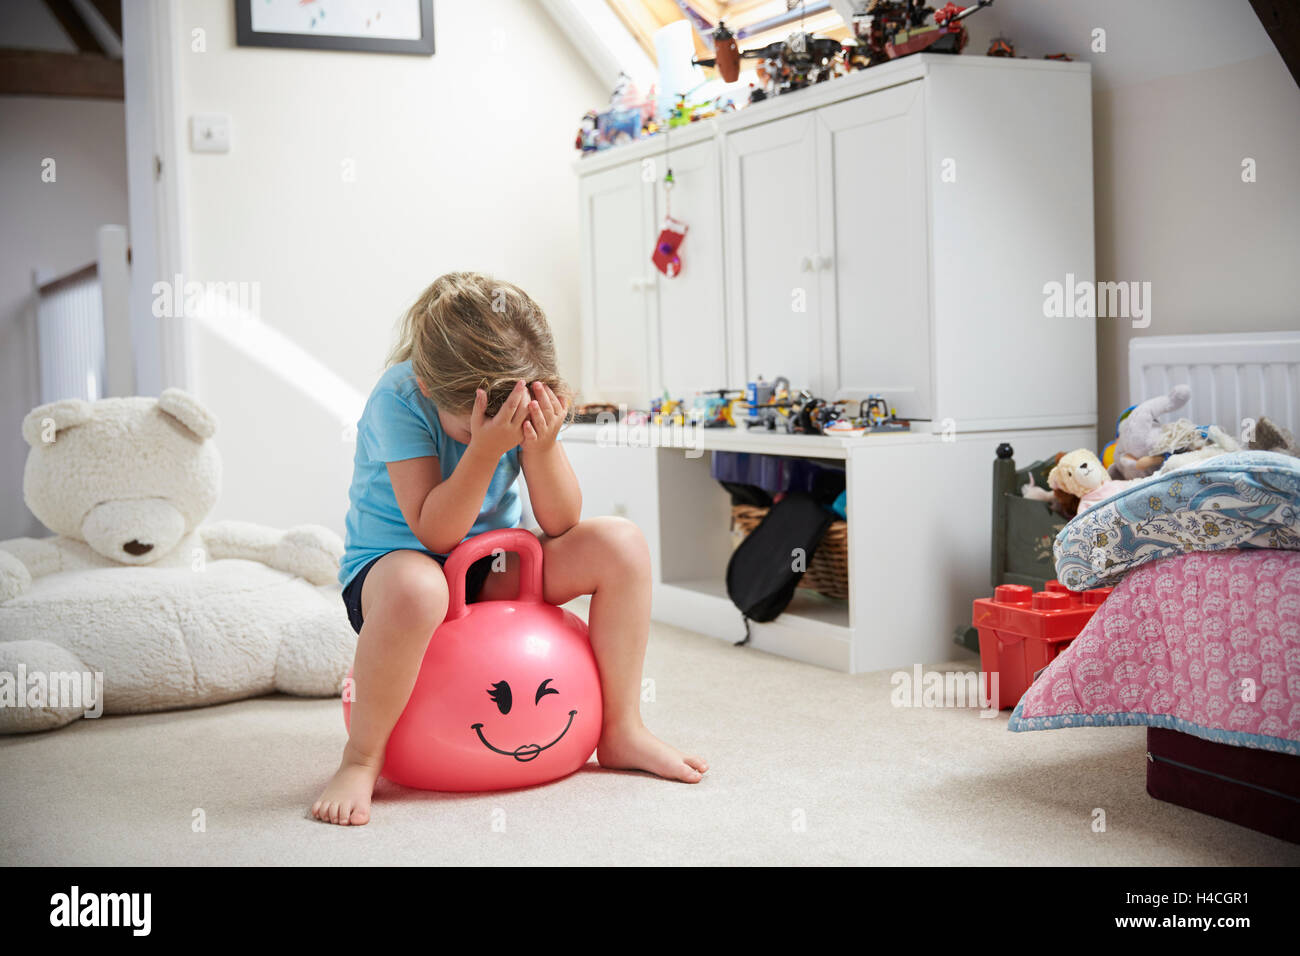 Girl Bounces On Inflatable Ball In Playroom Stock Photo